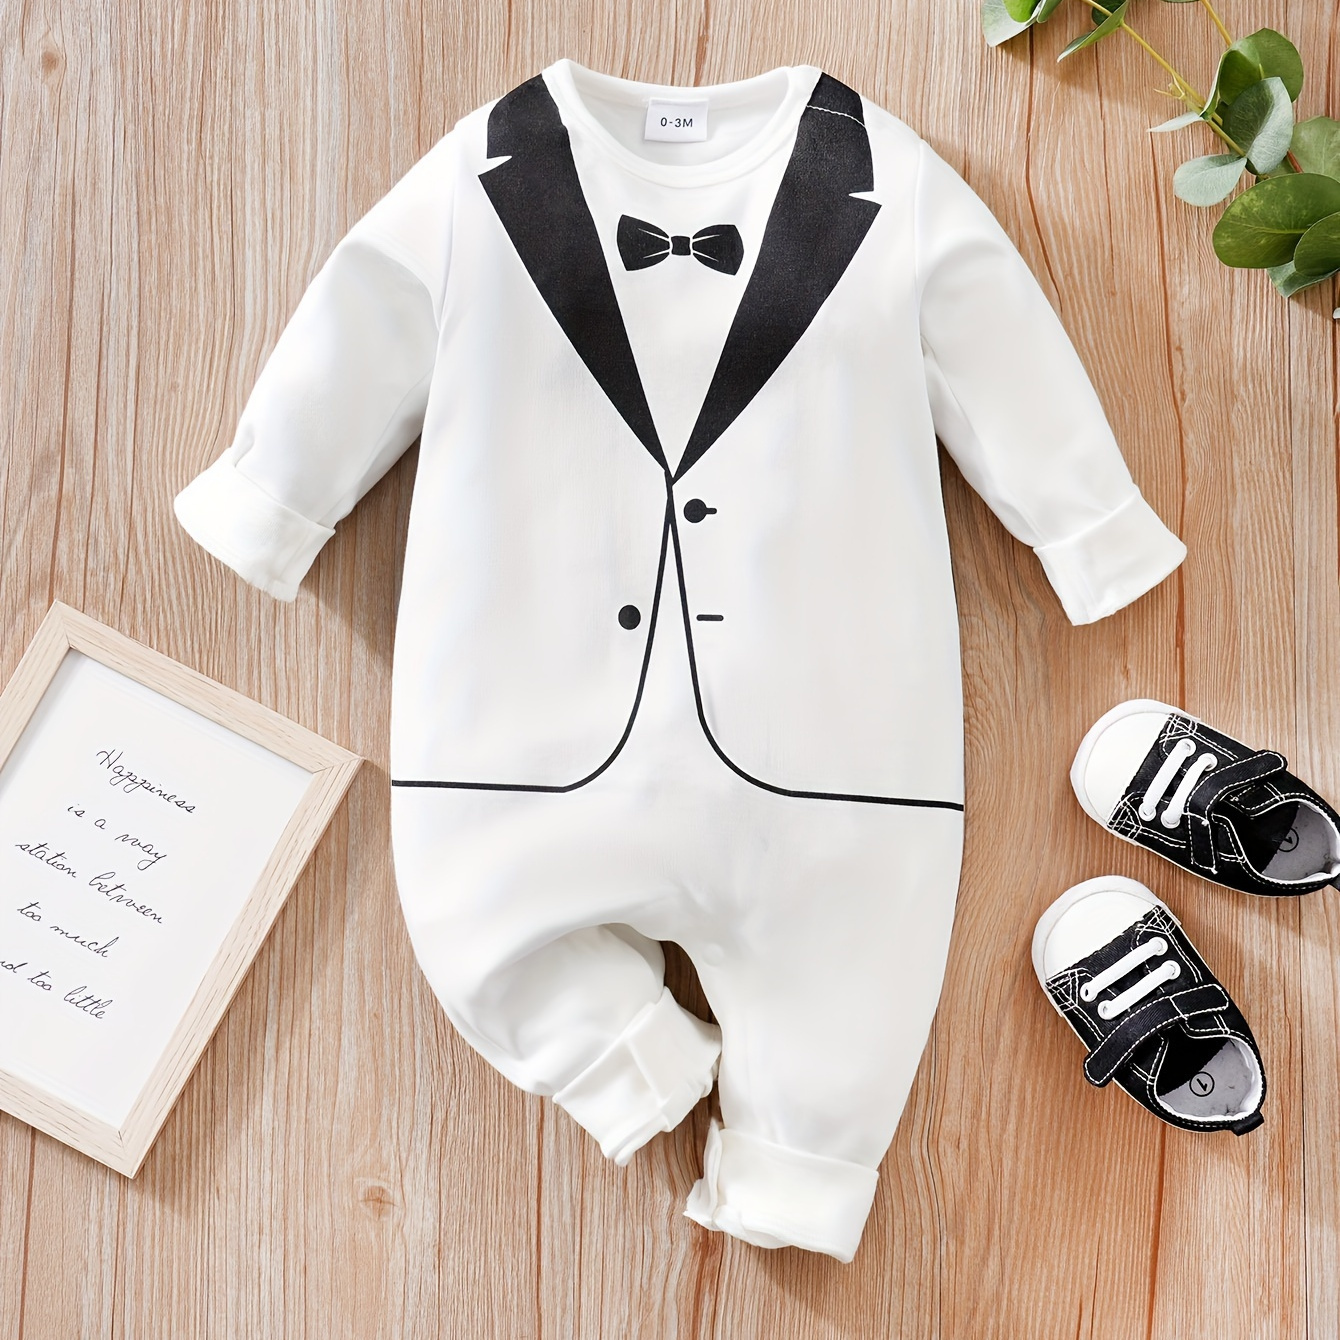 

Baby Boy's Gentleman's Style Cotton Long Sleeve Baby Romper, Casual Tuxedo Design, Spring/autumn One-piece Outfit